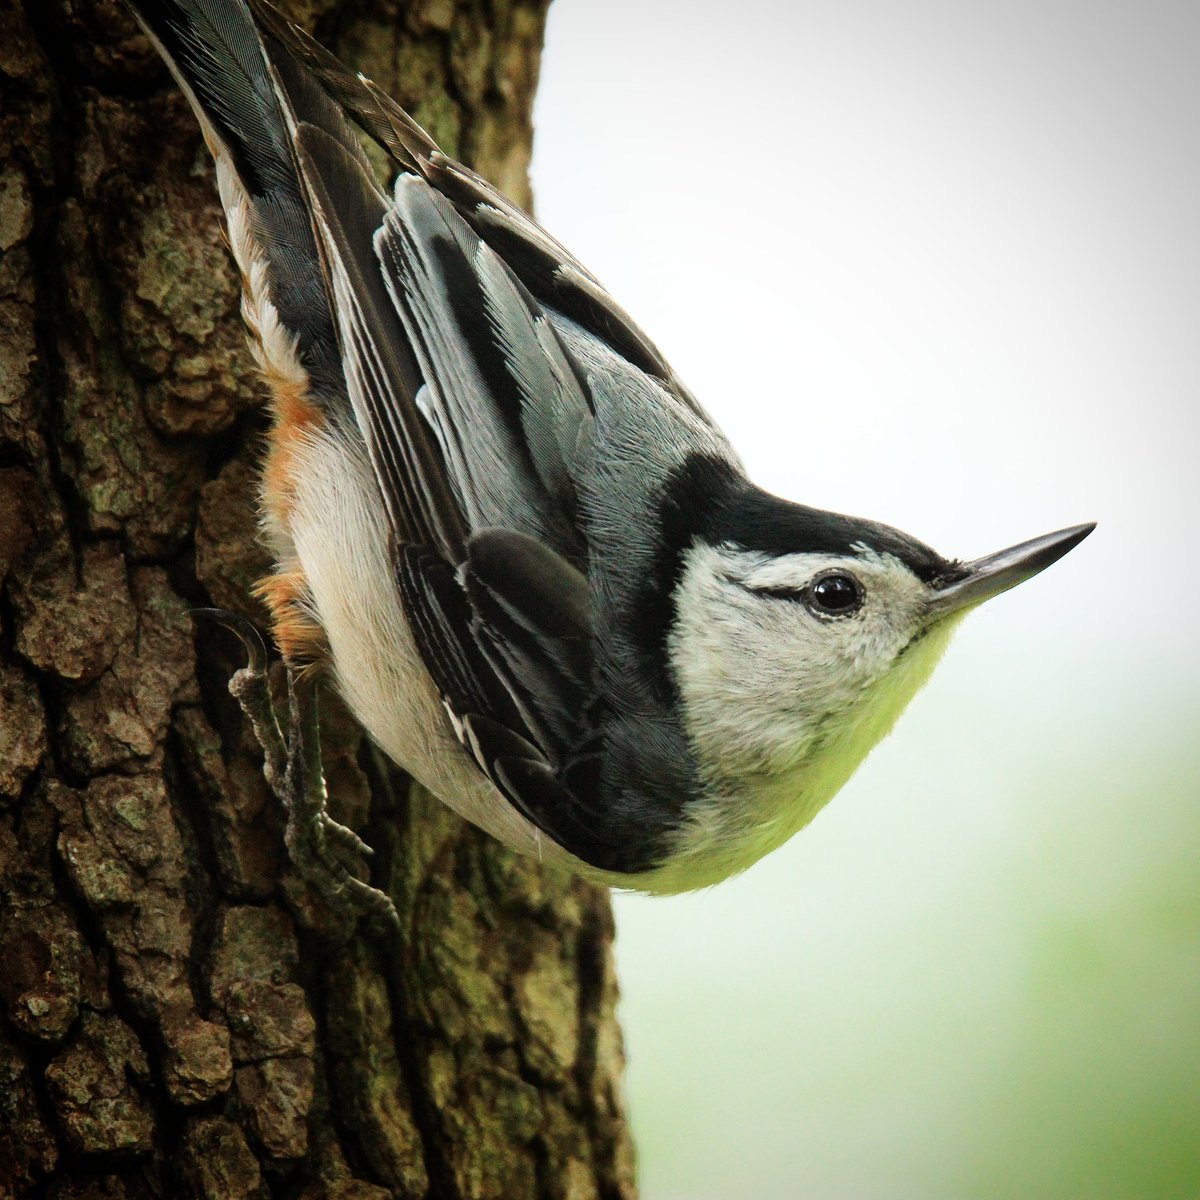 This friendly little nuthatch visited for a while...
#nuthatch #nuthatches #whitebreastednuthatch #whitebreastednuthatches #birding #ohiobirding #birder #ohiobirder #beavercreekohio #beavercreekbirding #beavercreek